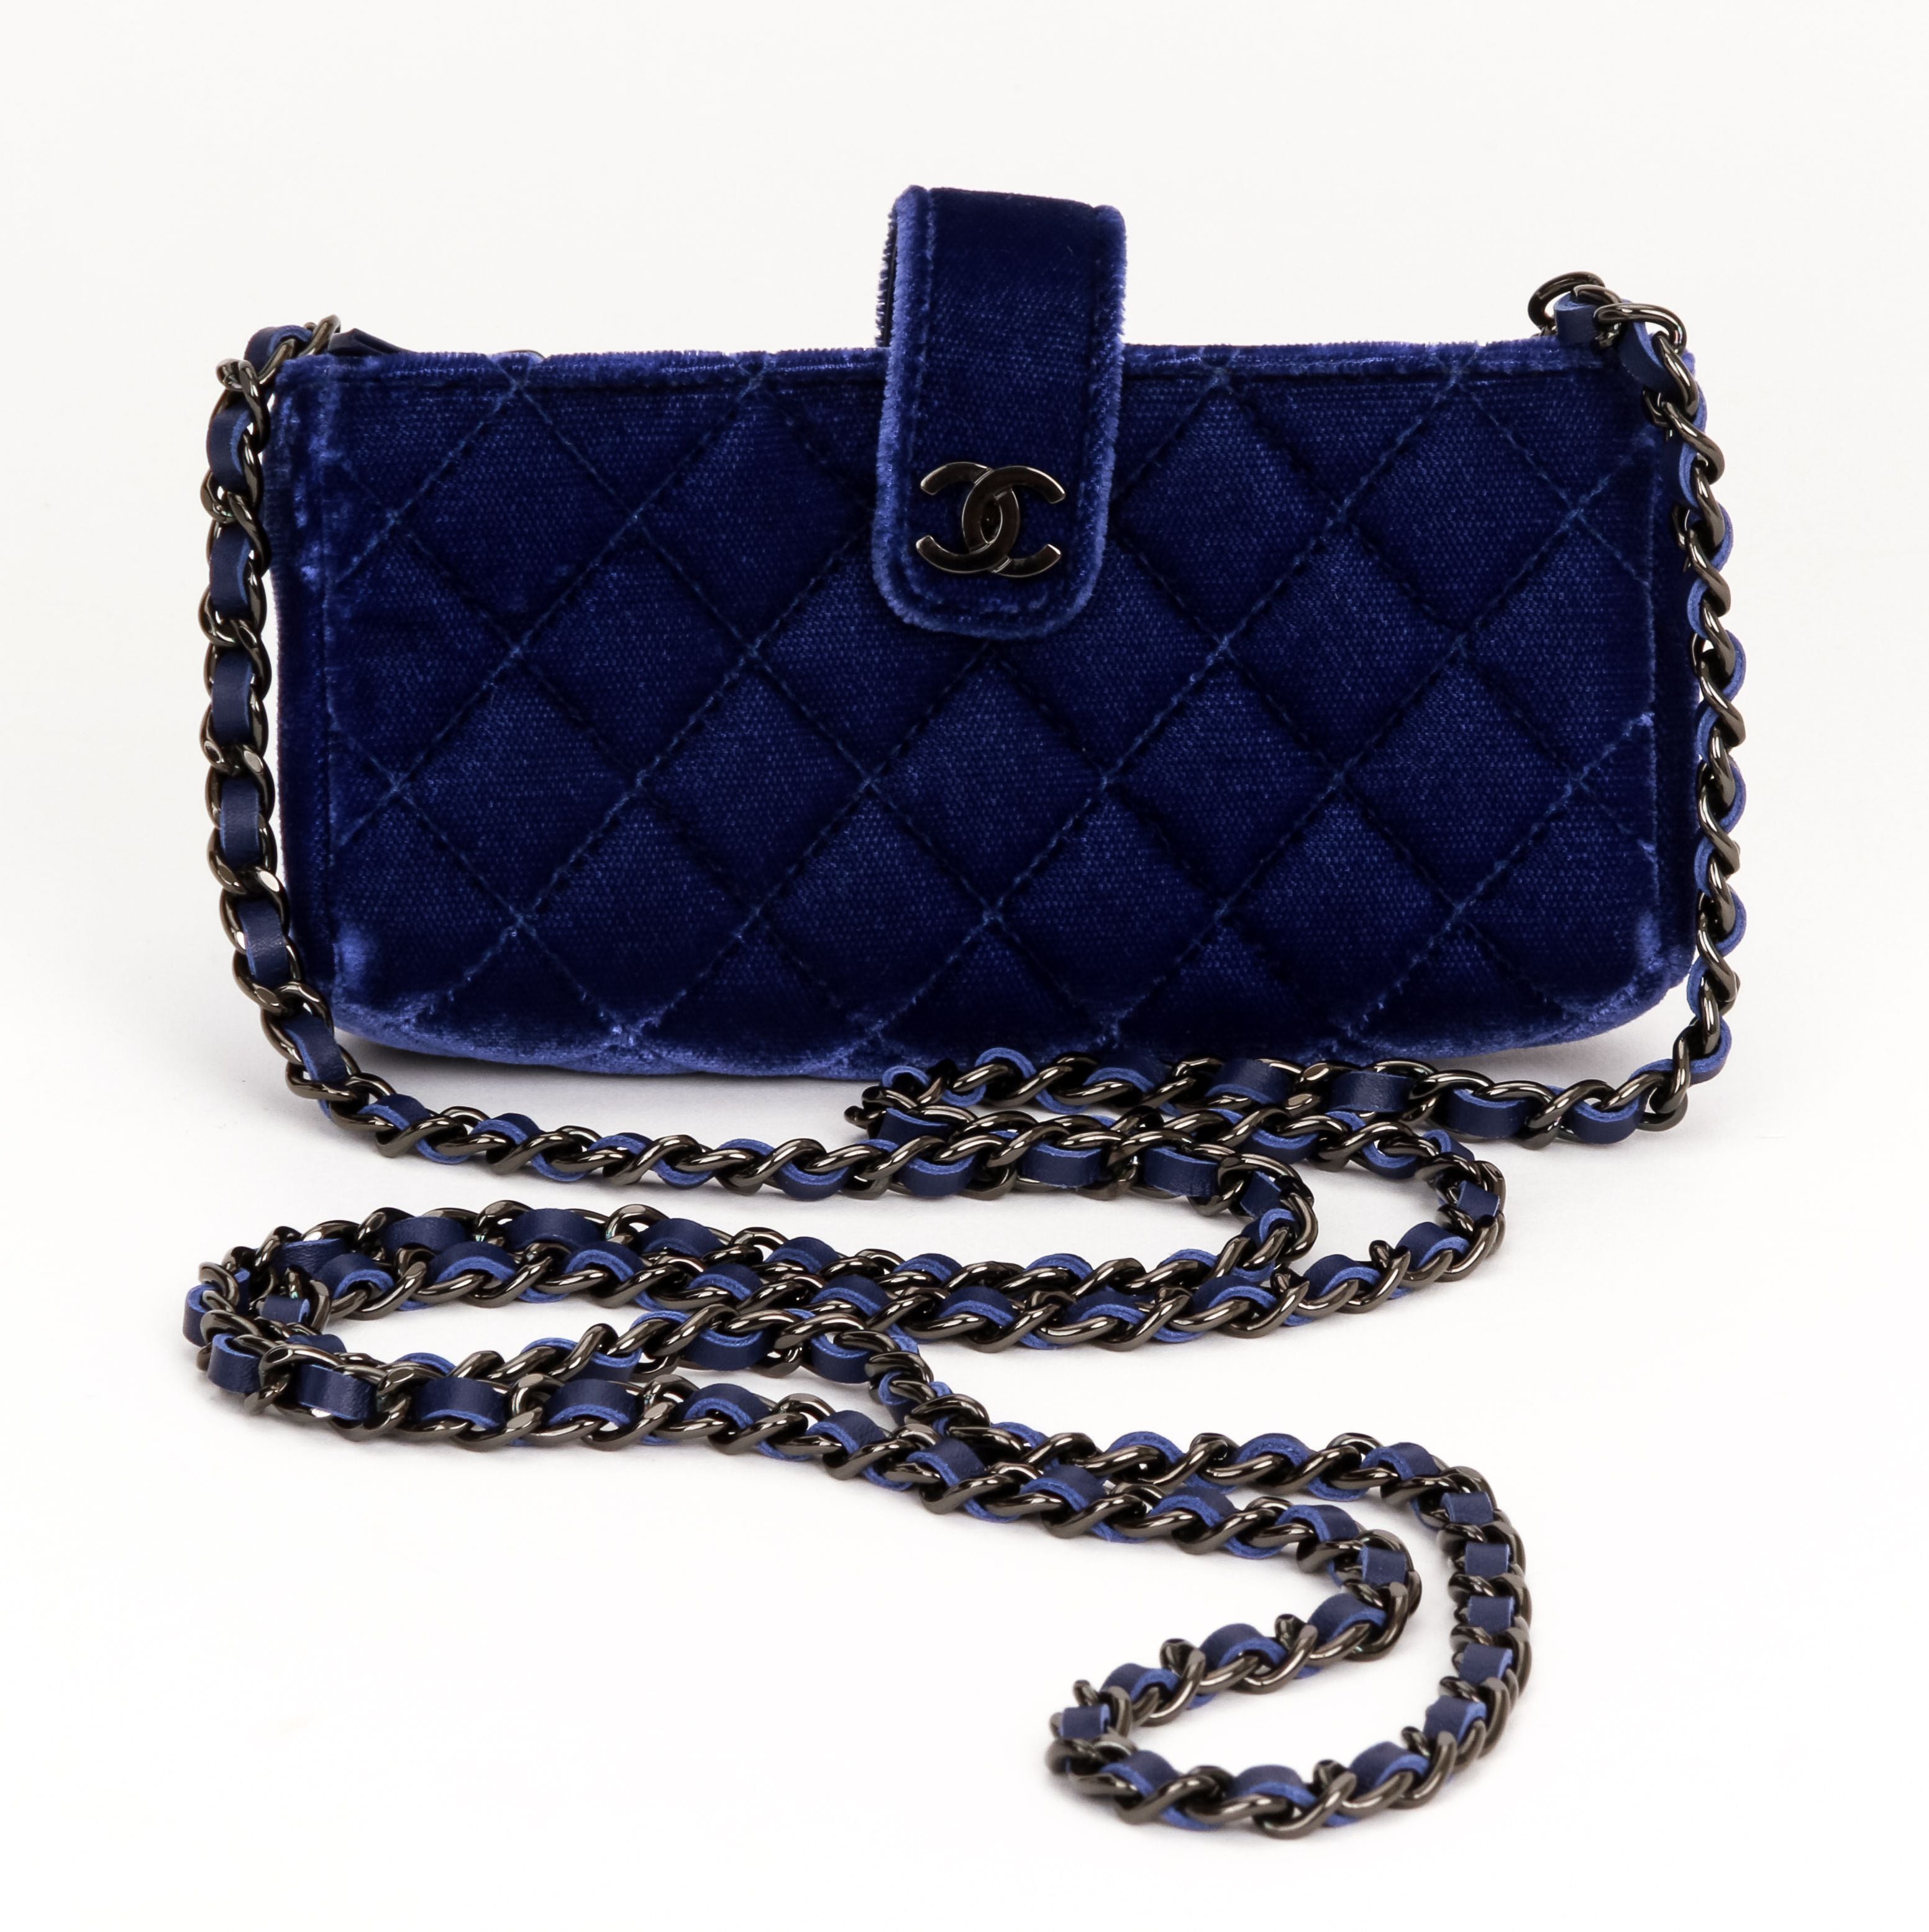 RARE CHANEL MICRO MINI CROSSBODY/SHOULDER BAG, quilted velvet with  interwoven leather and chain strap, front flap closure with leather  interior, 1989-91, 8cm x 7cm x 3cm.